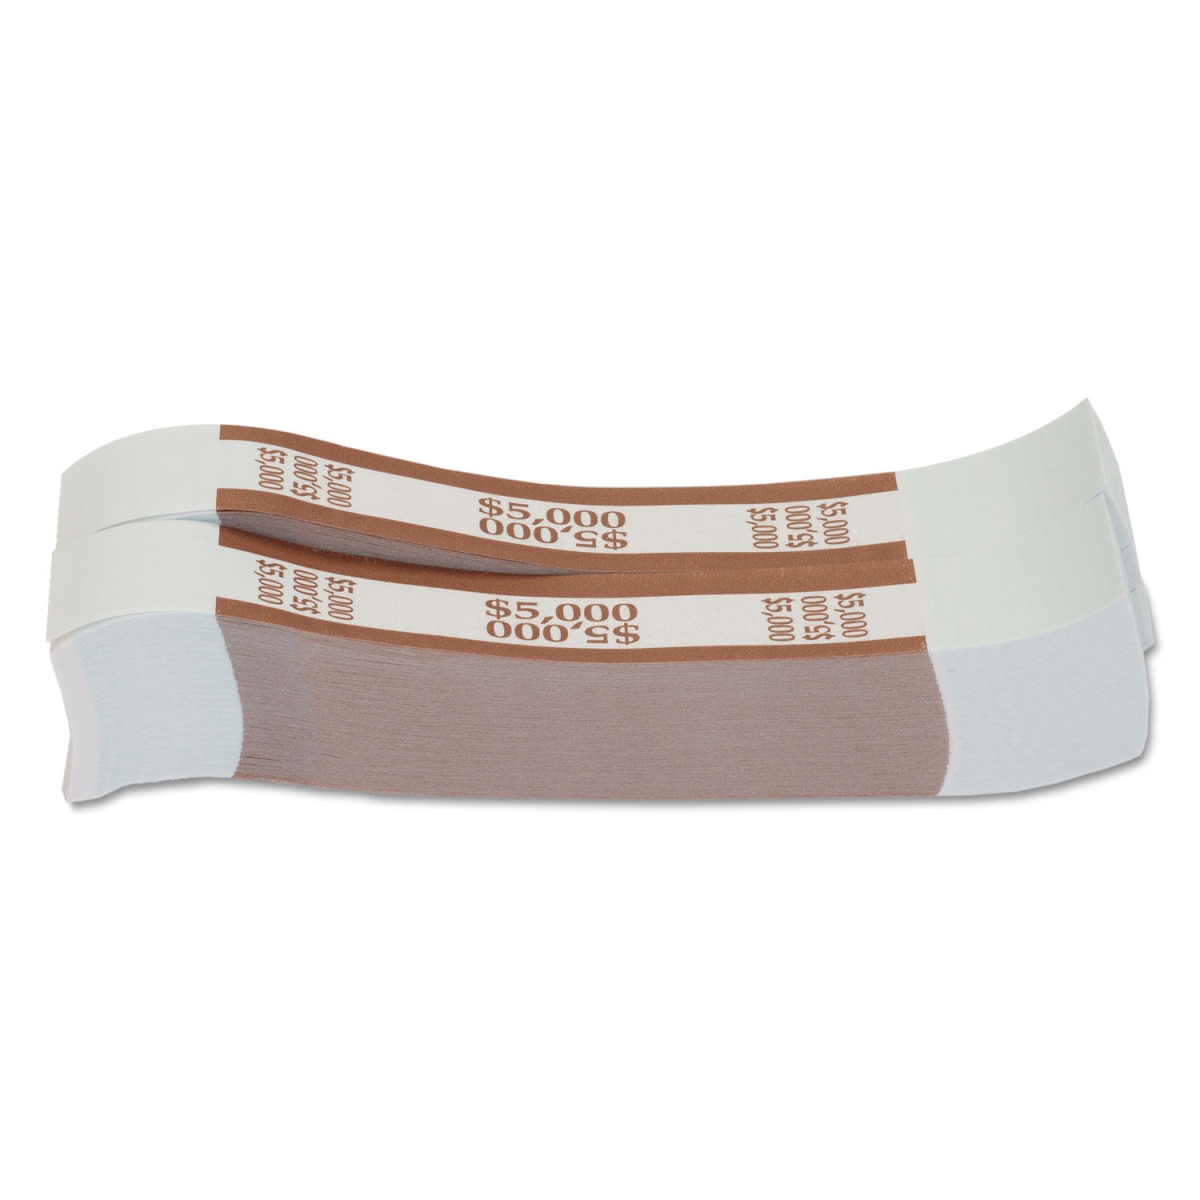 Picture of Pap CTX405000 5000 Dollar Bills Currency Strap, Brown